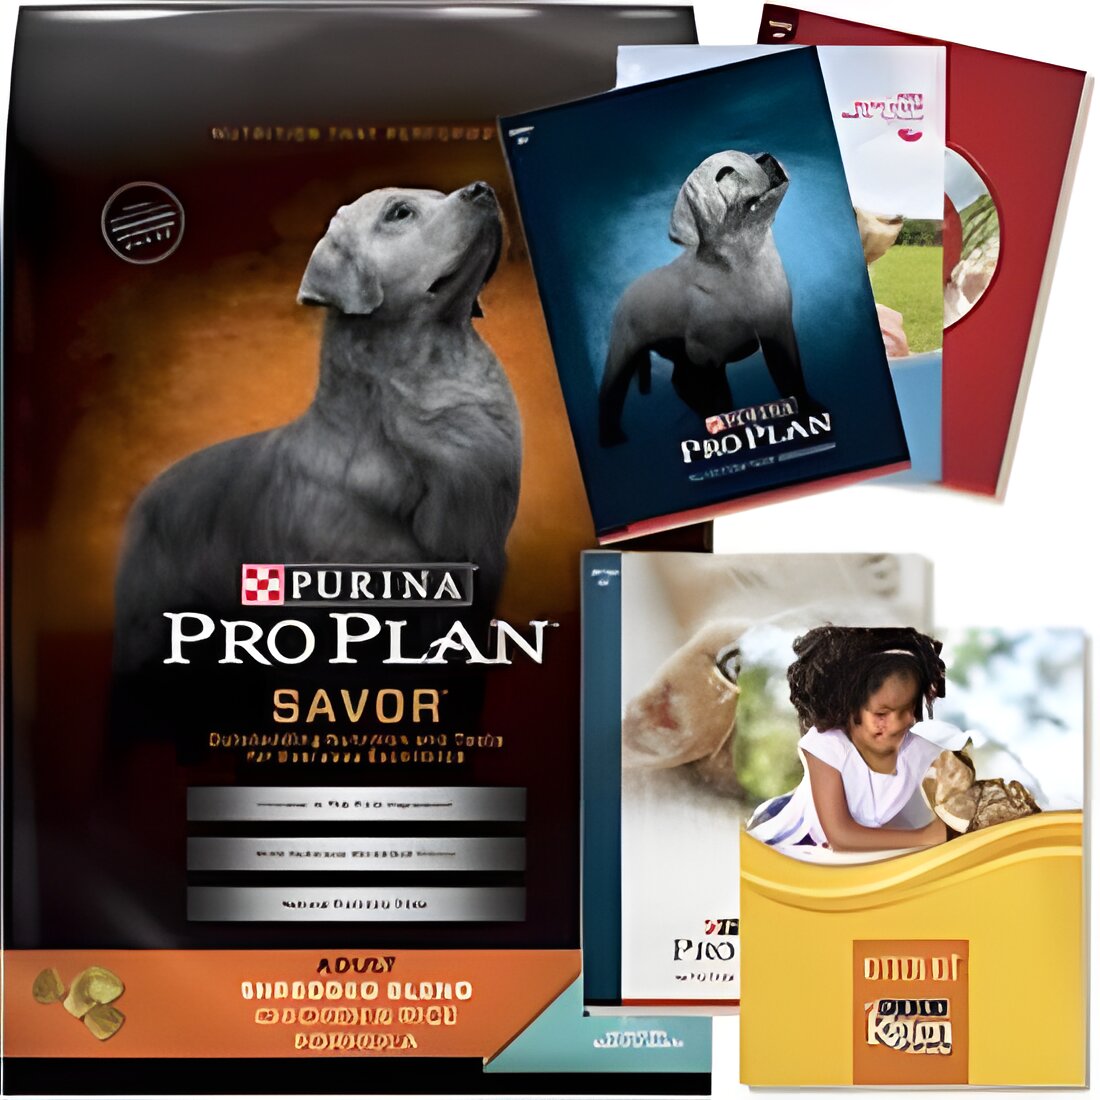 Free Puppy and Kitten Starter Kits From Purina